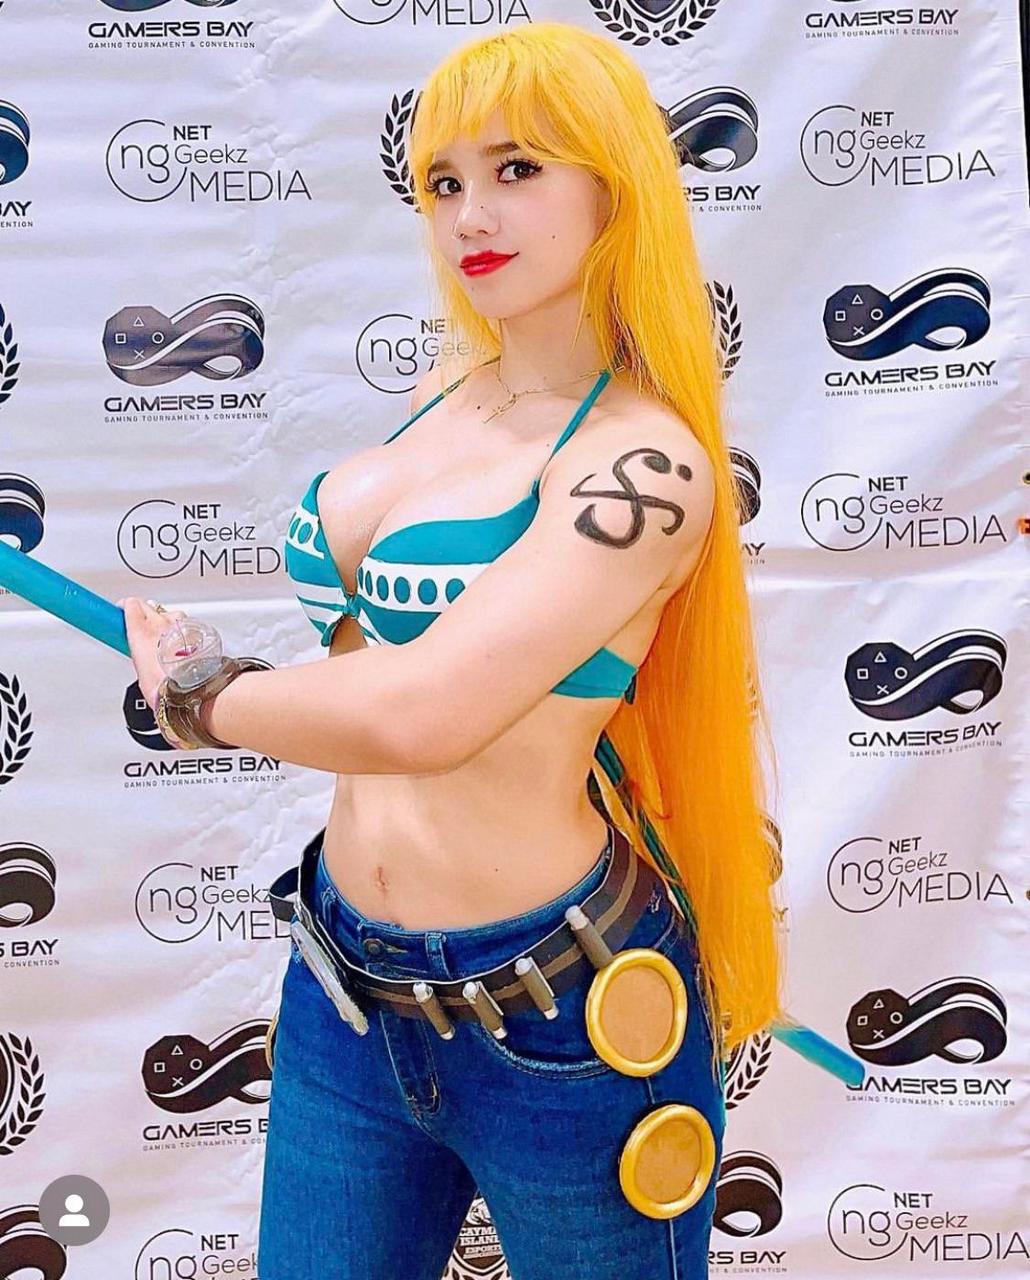 Windygirk As Nami From One Piece Gamers Bay 6 Cayman Island